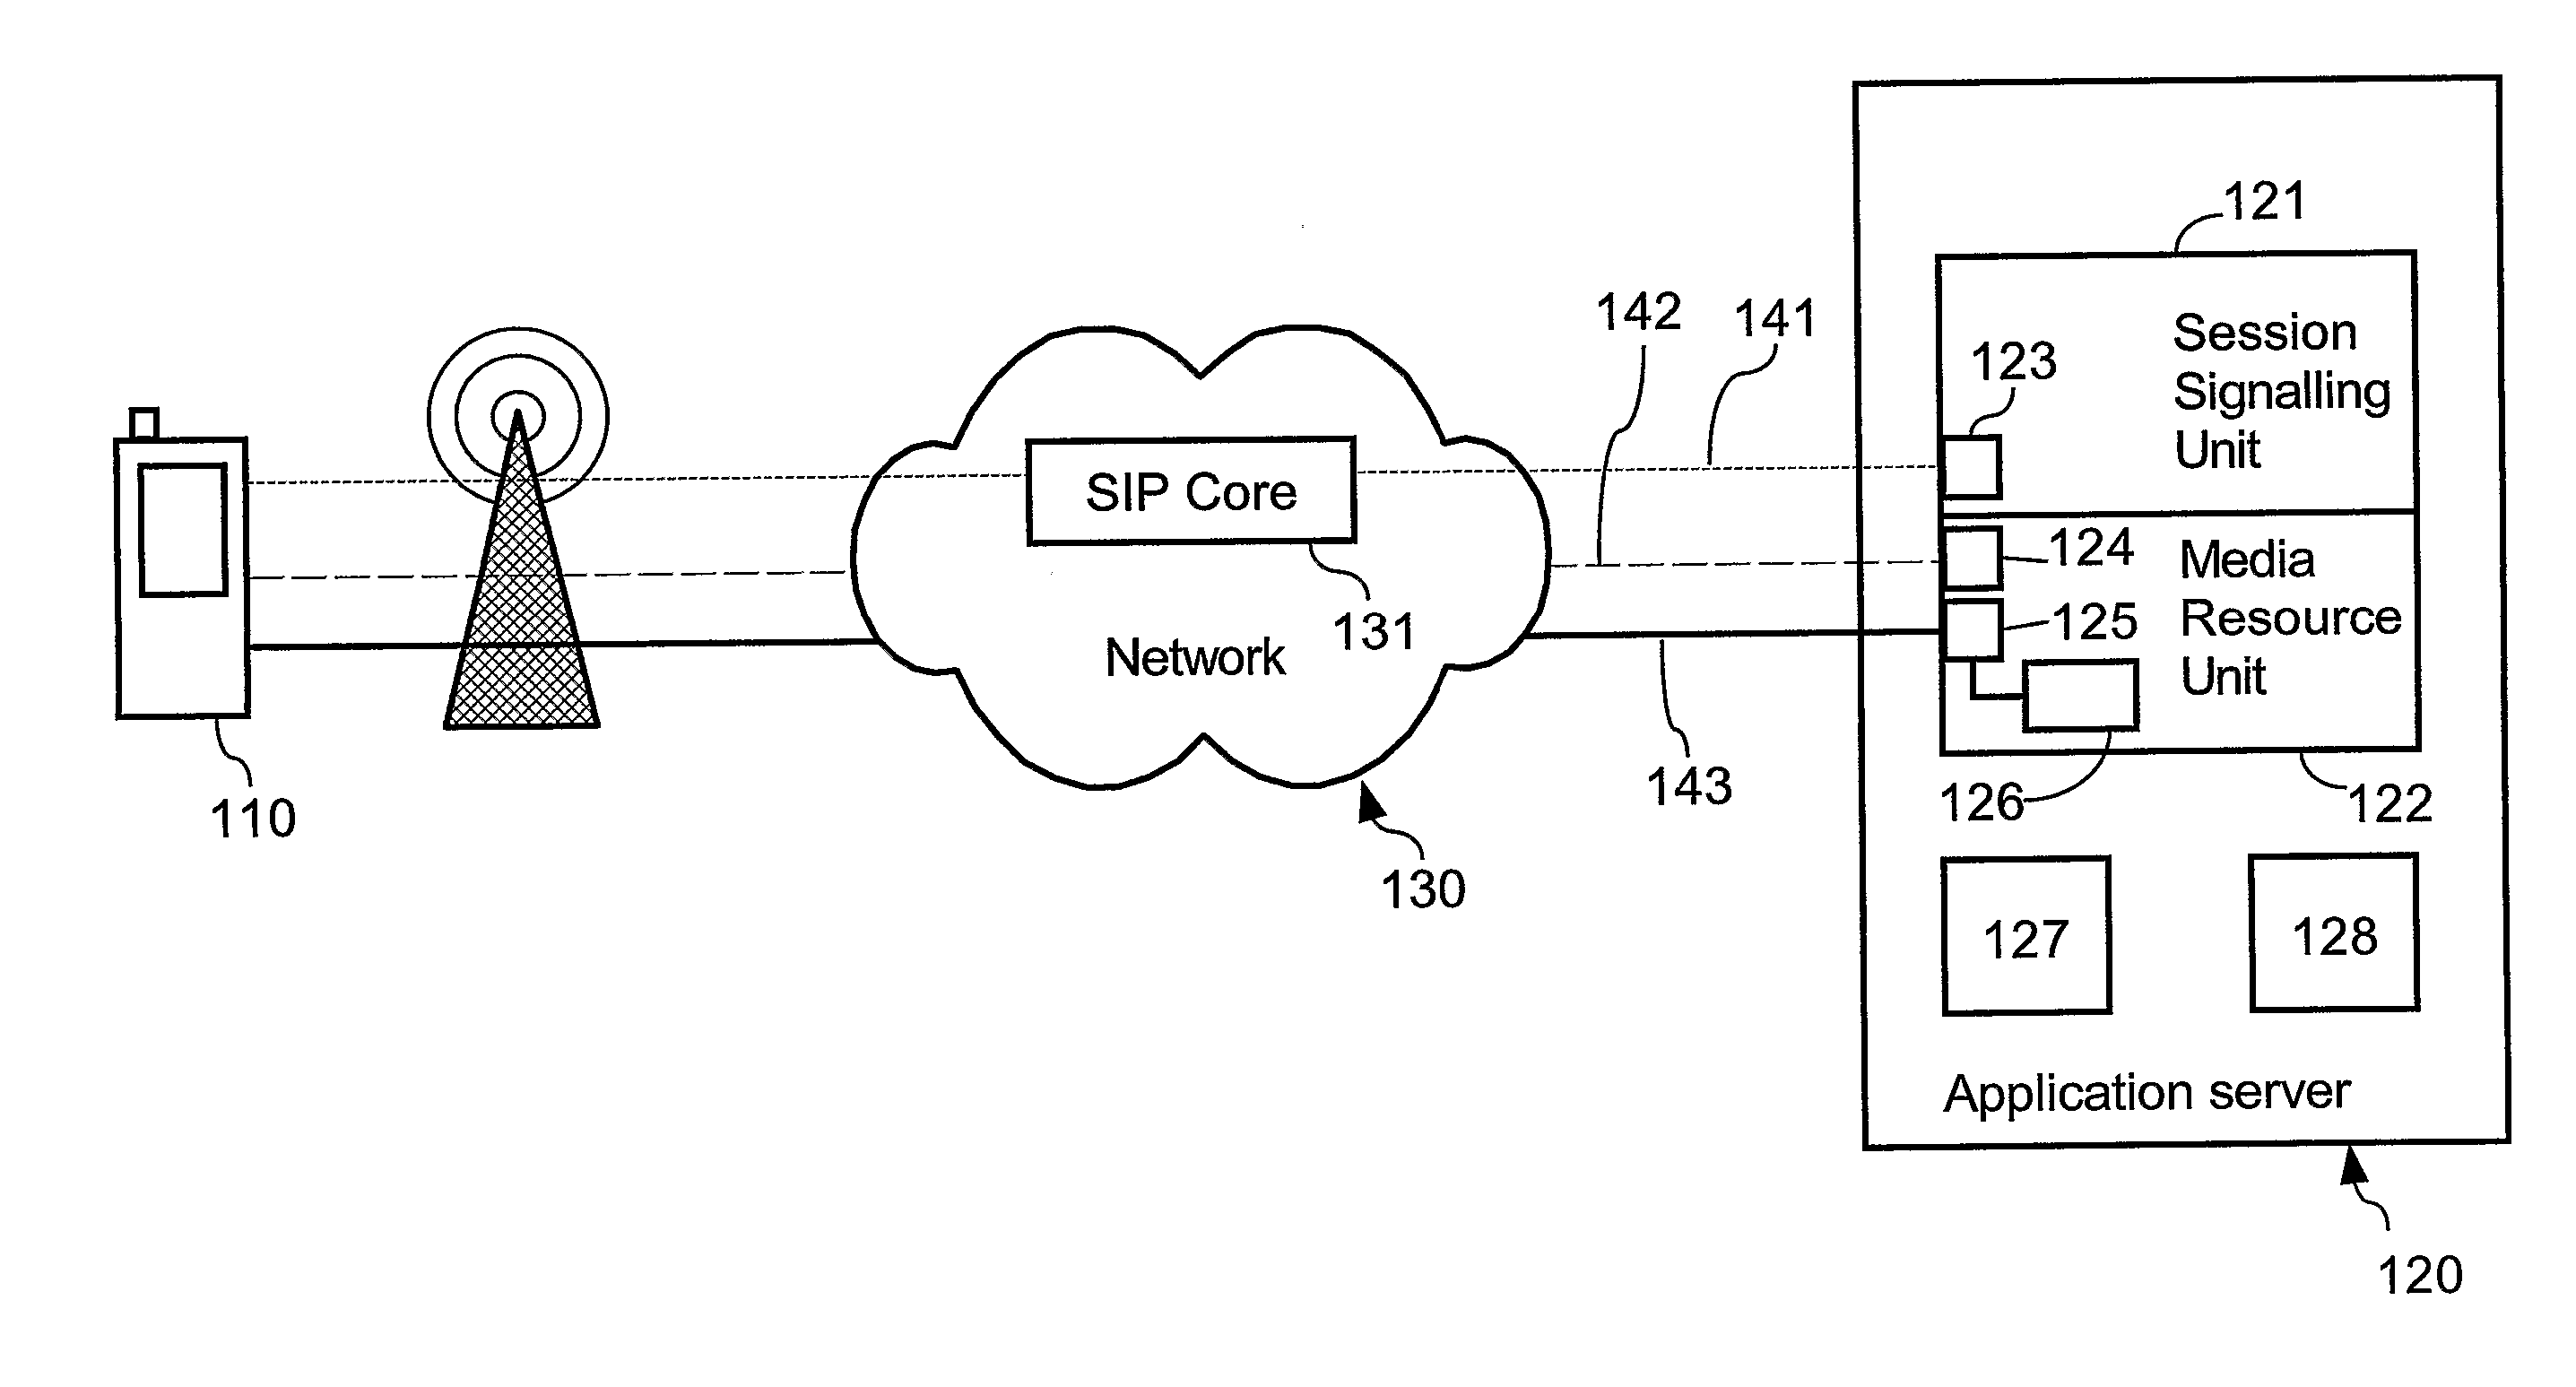 Message and arrangement for provding different services in a multimedia communication system